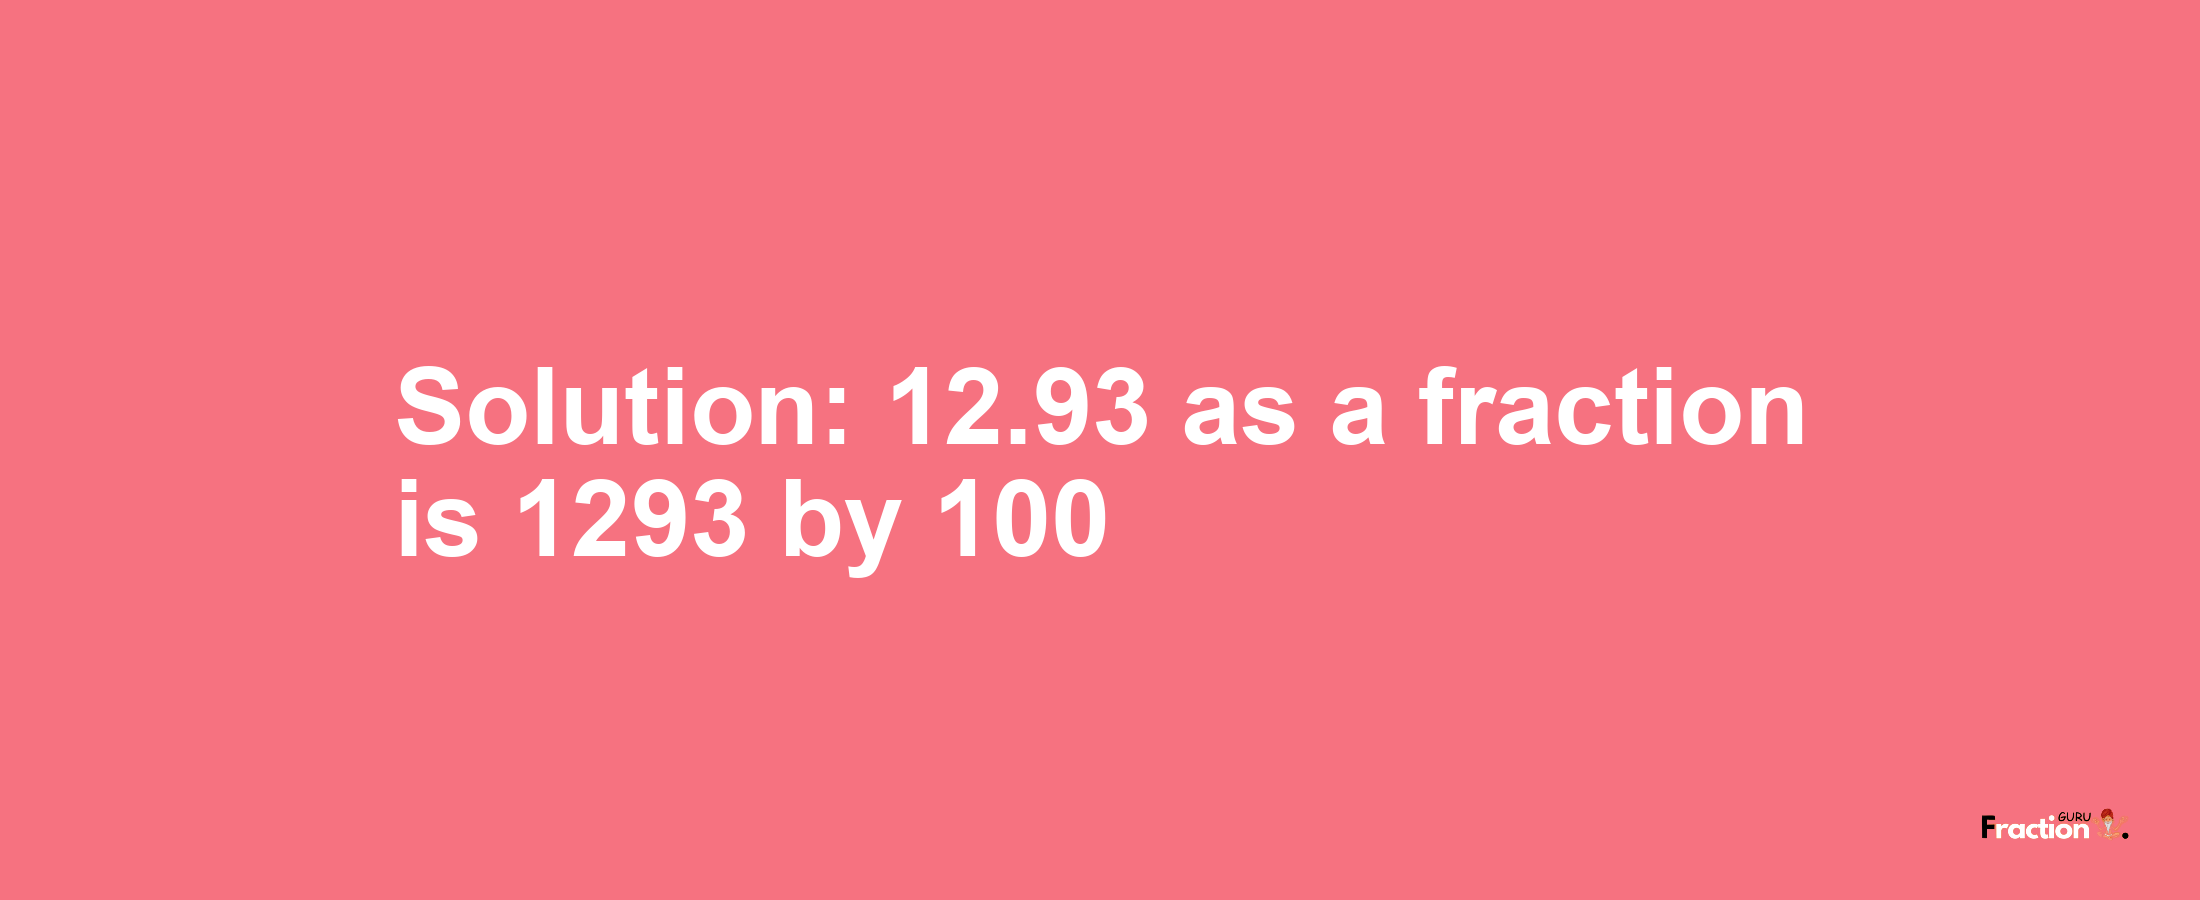 Solution:12.93 as a fraction is 1293/100